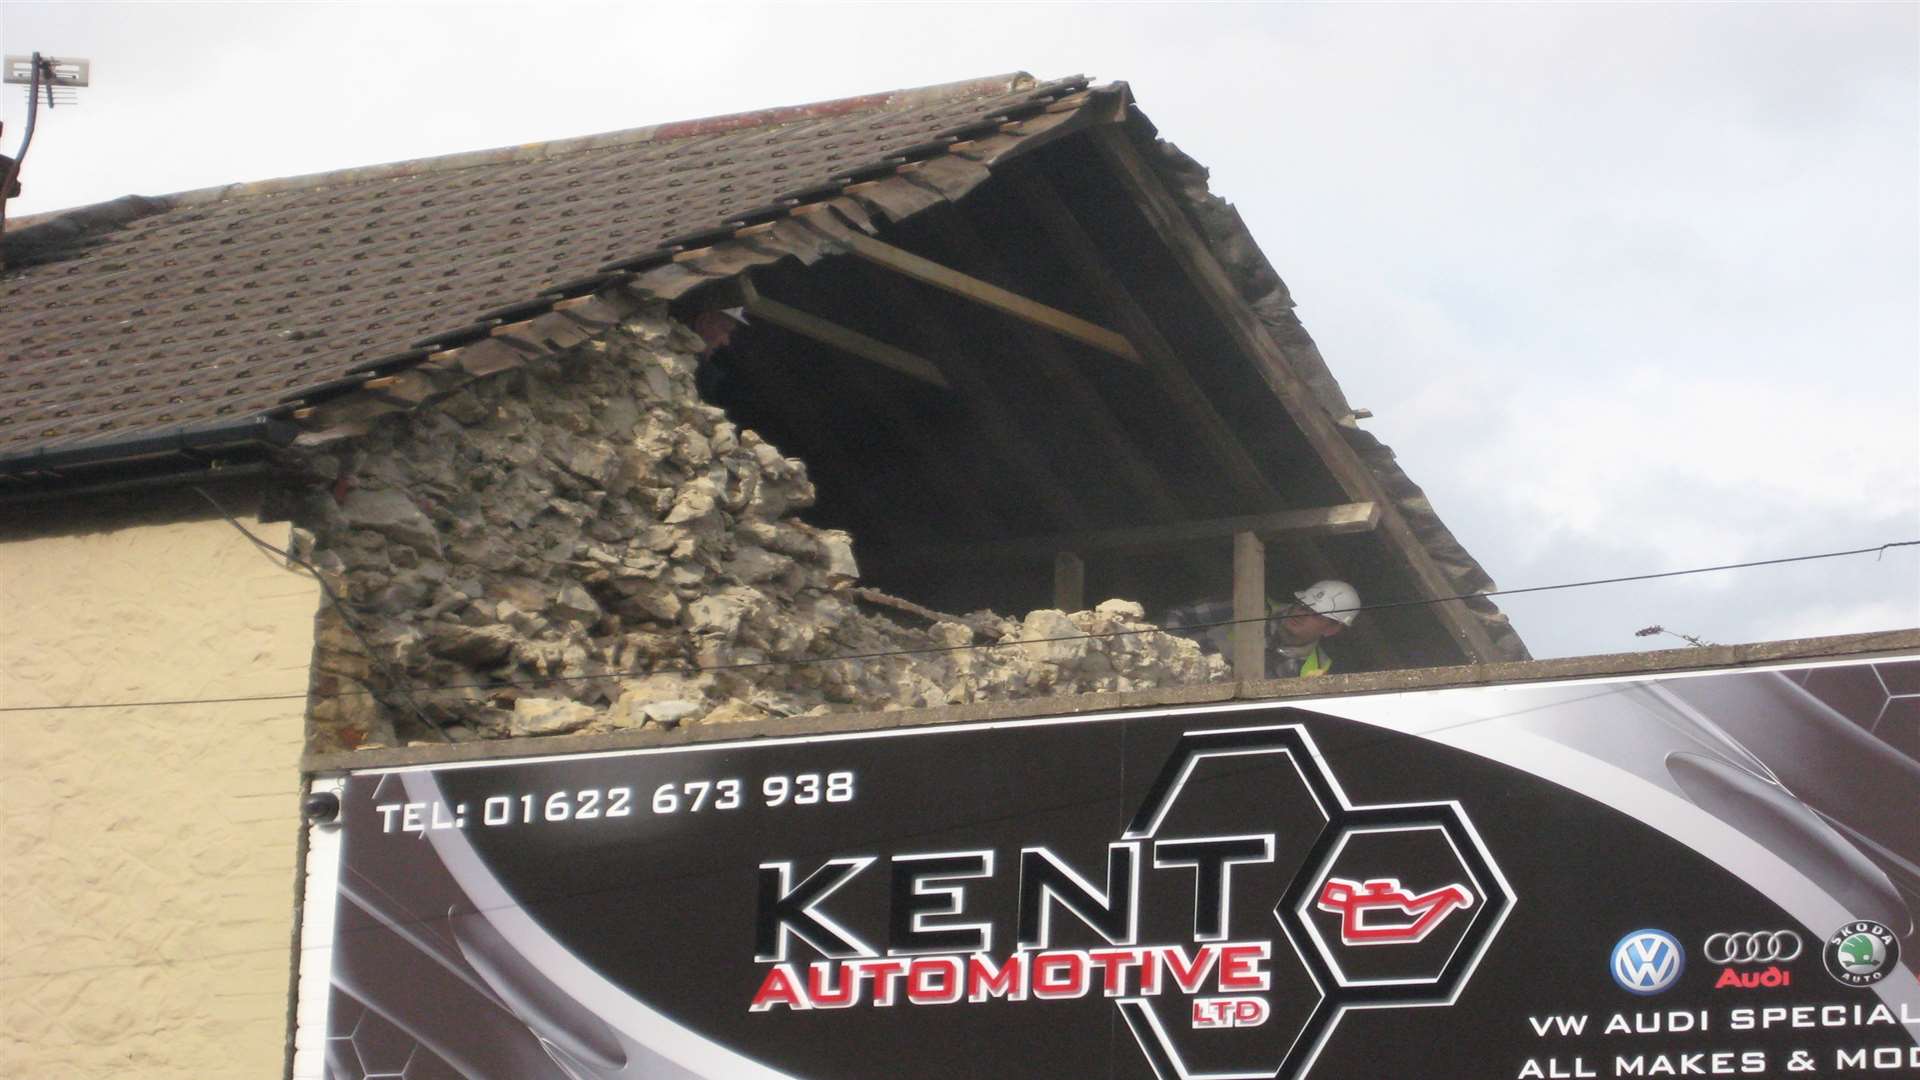 The wall of a house fell onto a business in Cross Street, Maidstone